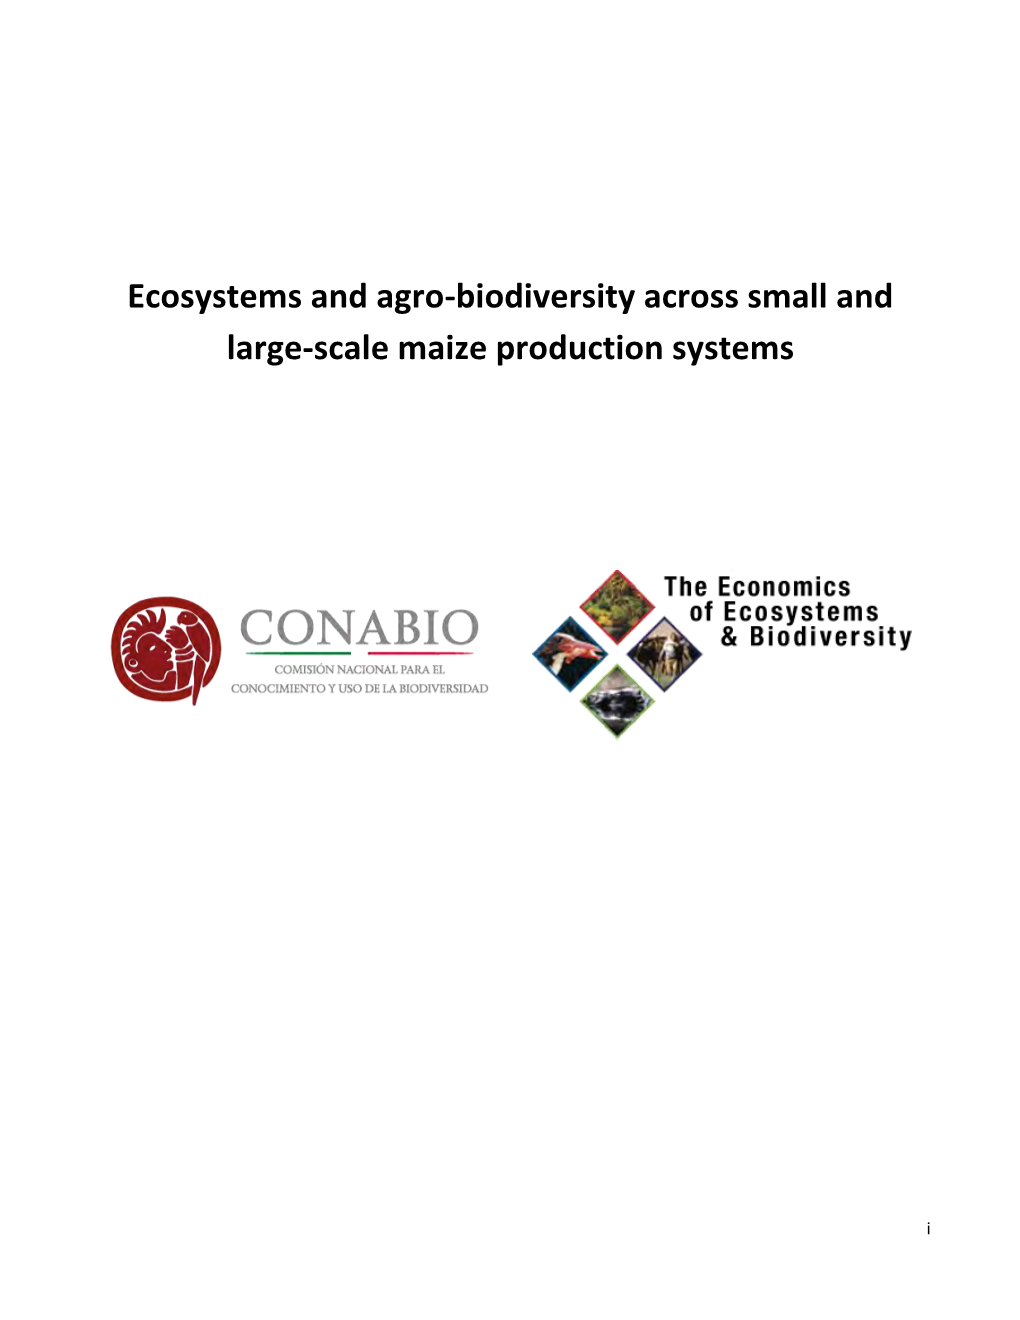 Ecosystems and Agro-Biodiversity Across Small and Large-Scale Maize Production Systems